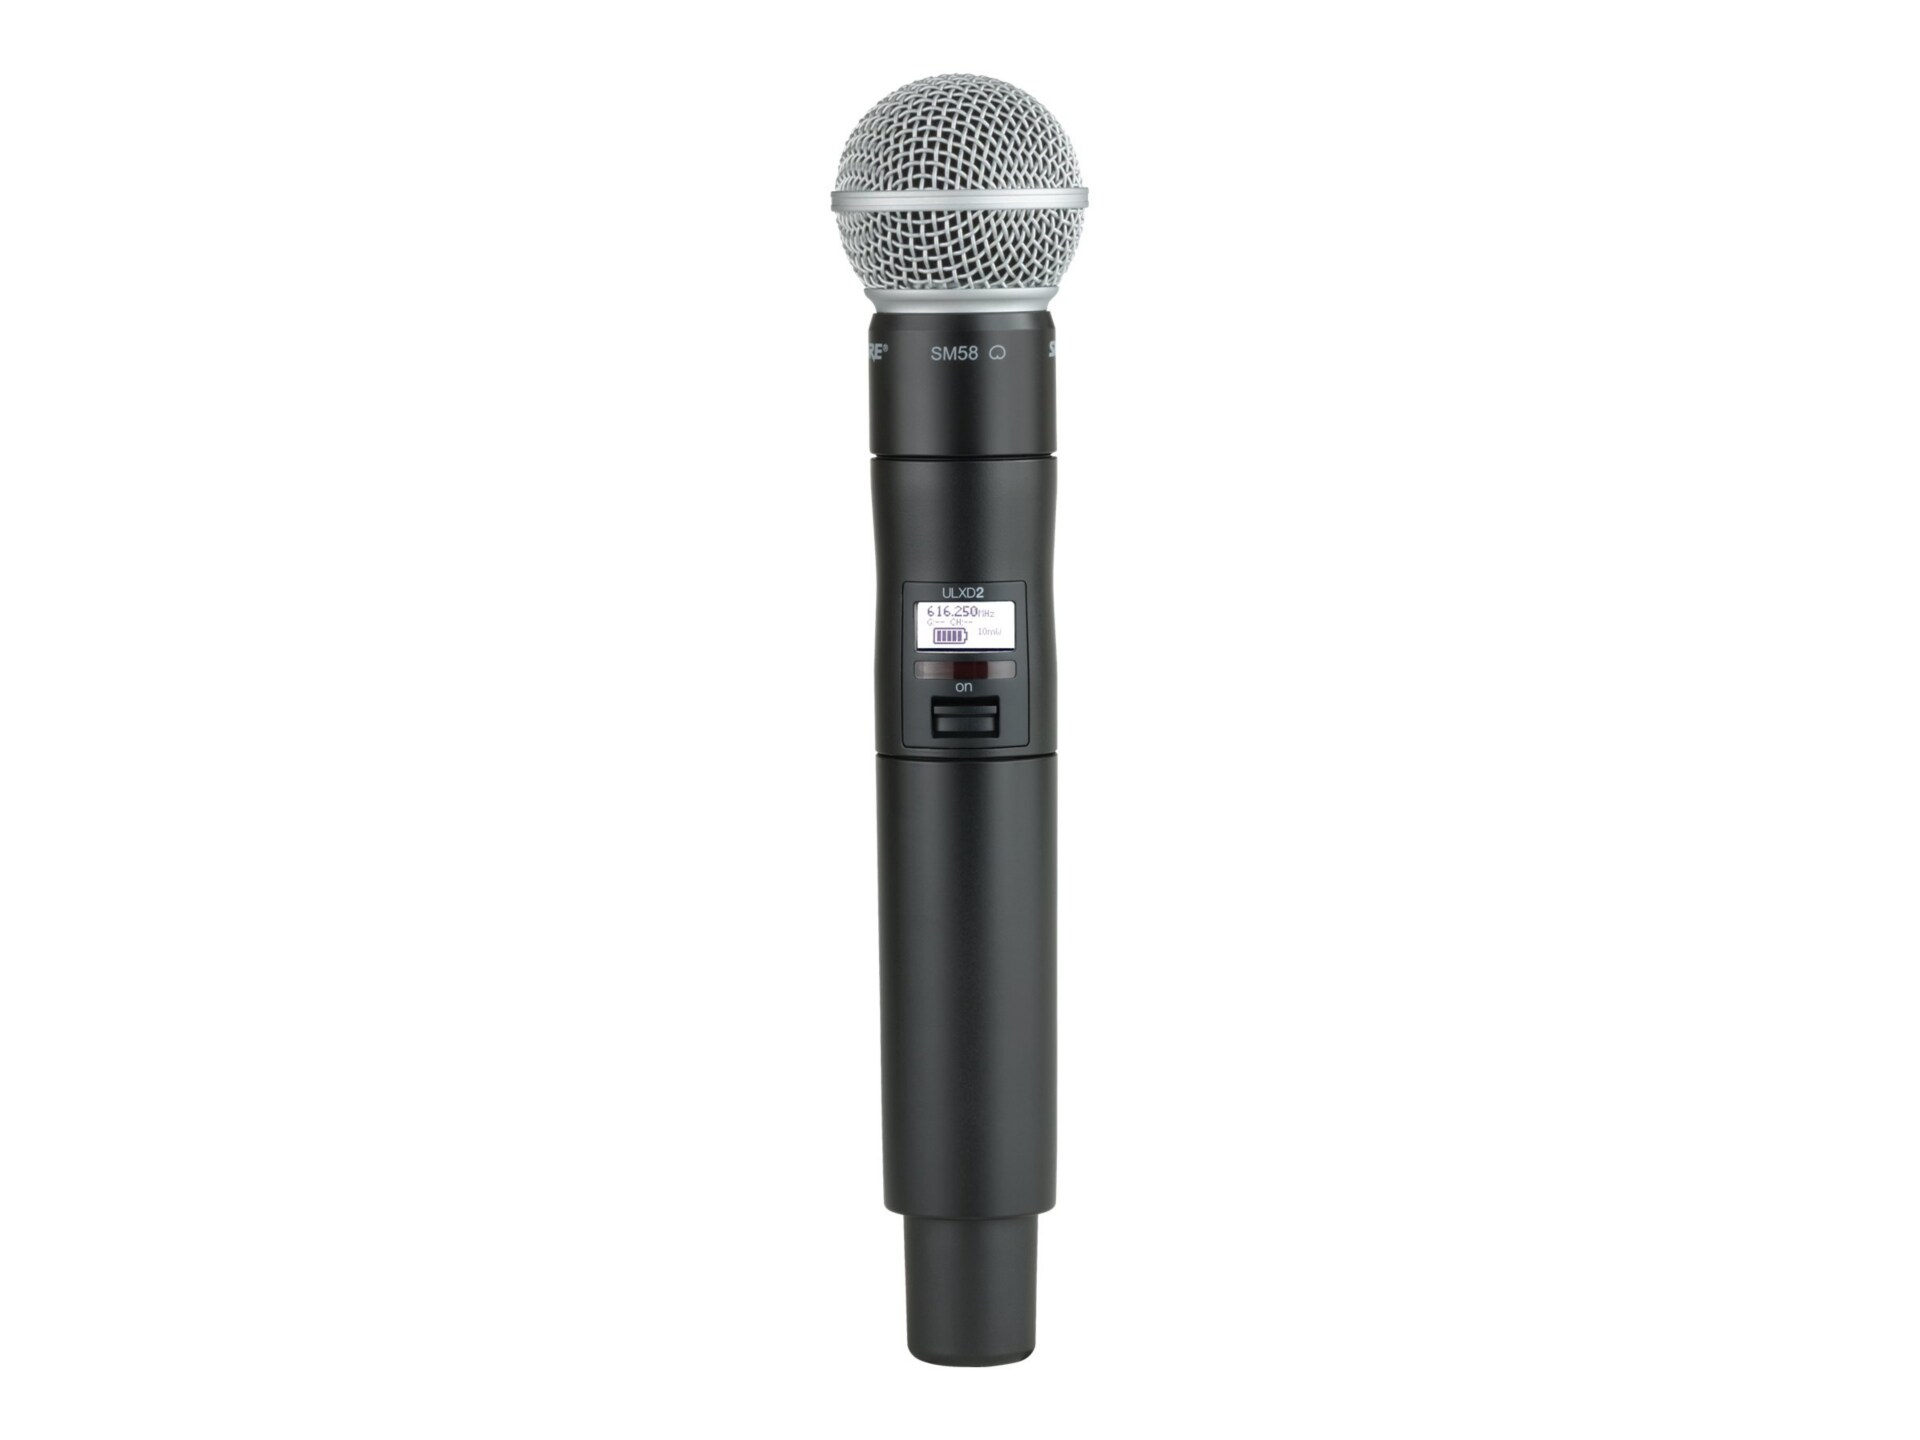 Shure Digital Handheld Transmitter with SM58 Capsule for ULX-D Digital Wireless System